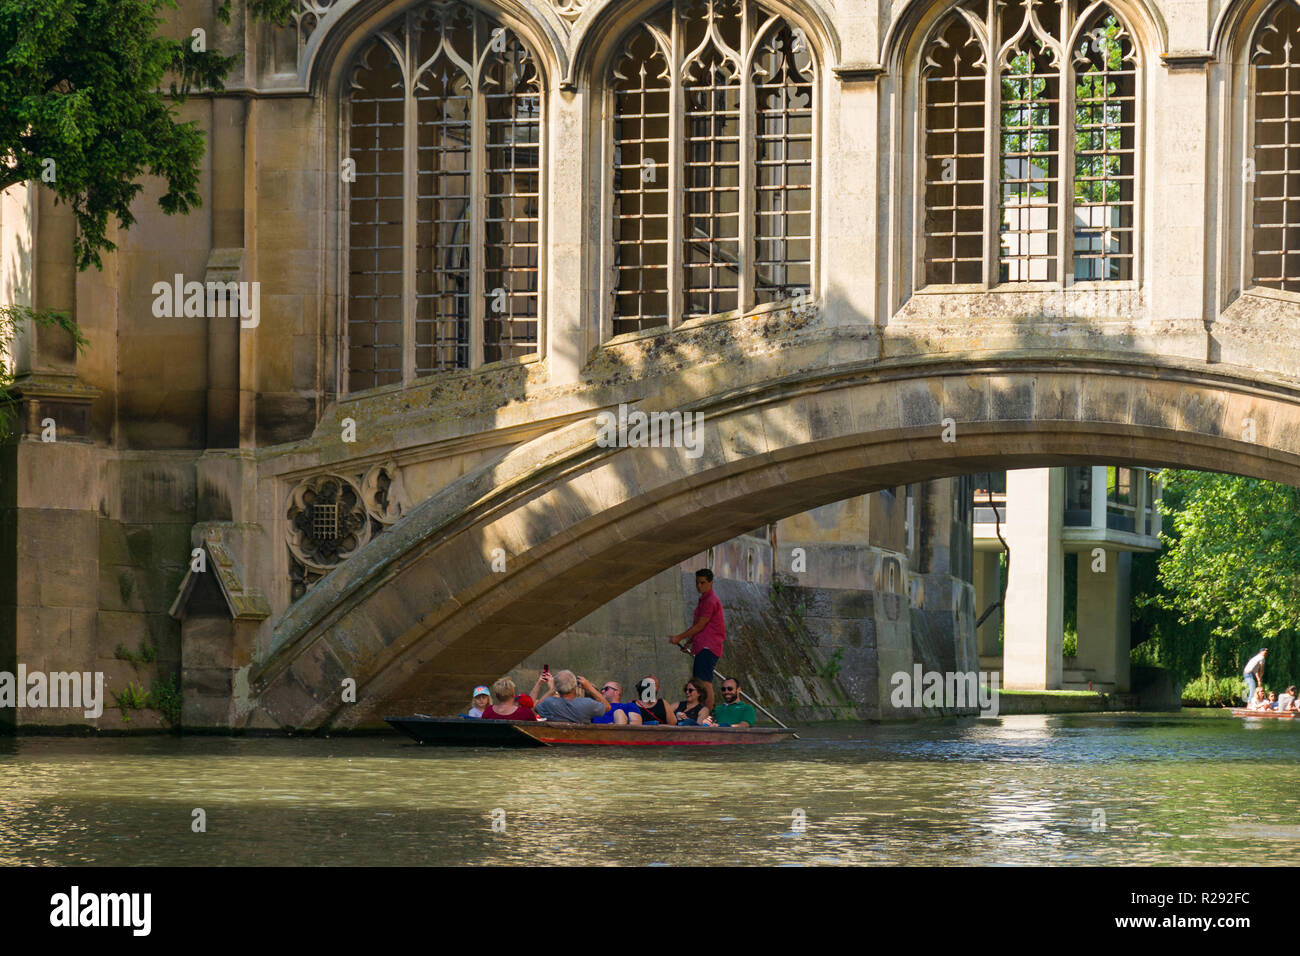 A punt boat with tourists passes under the Bridge of SIghs on a Sunny afternoon, Cambridge, UK Stock Photo